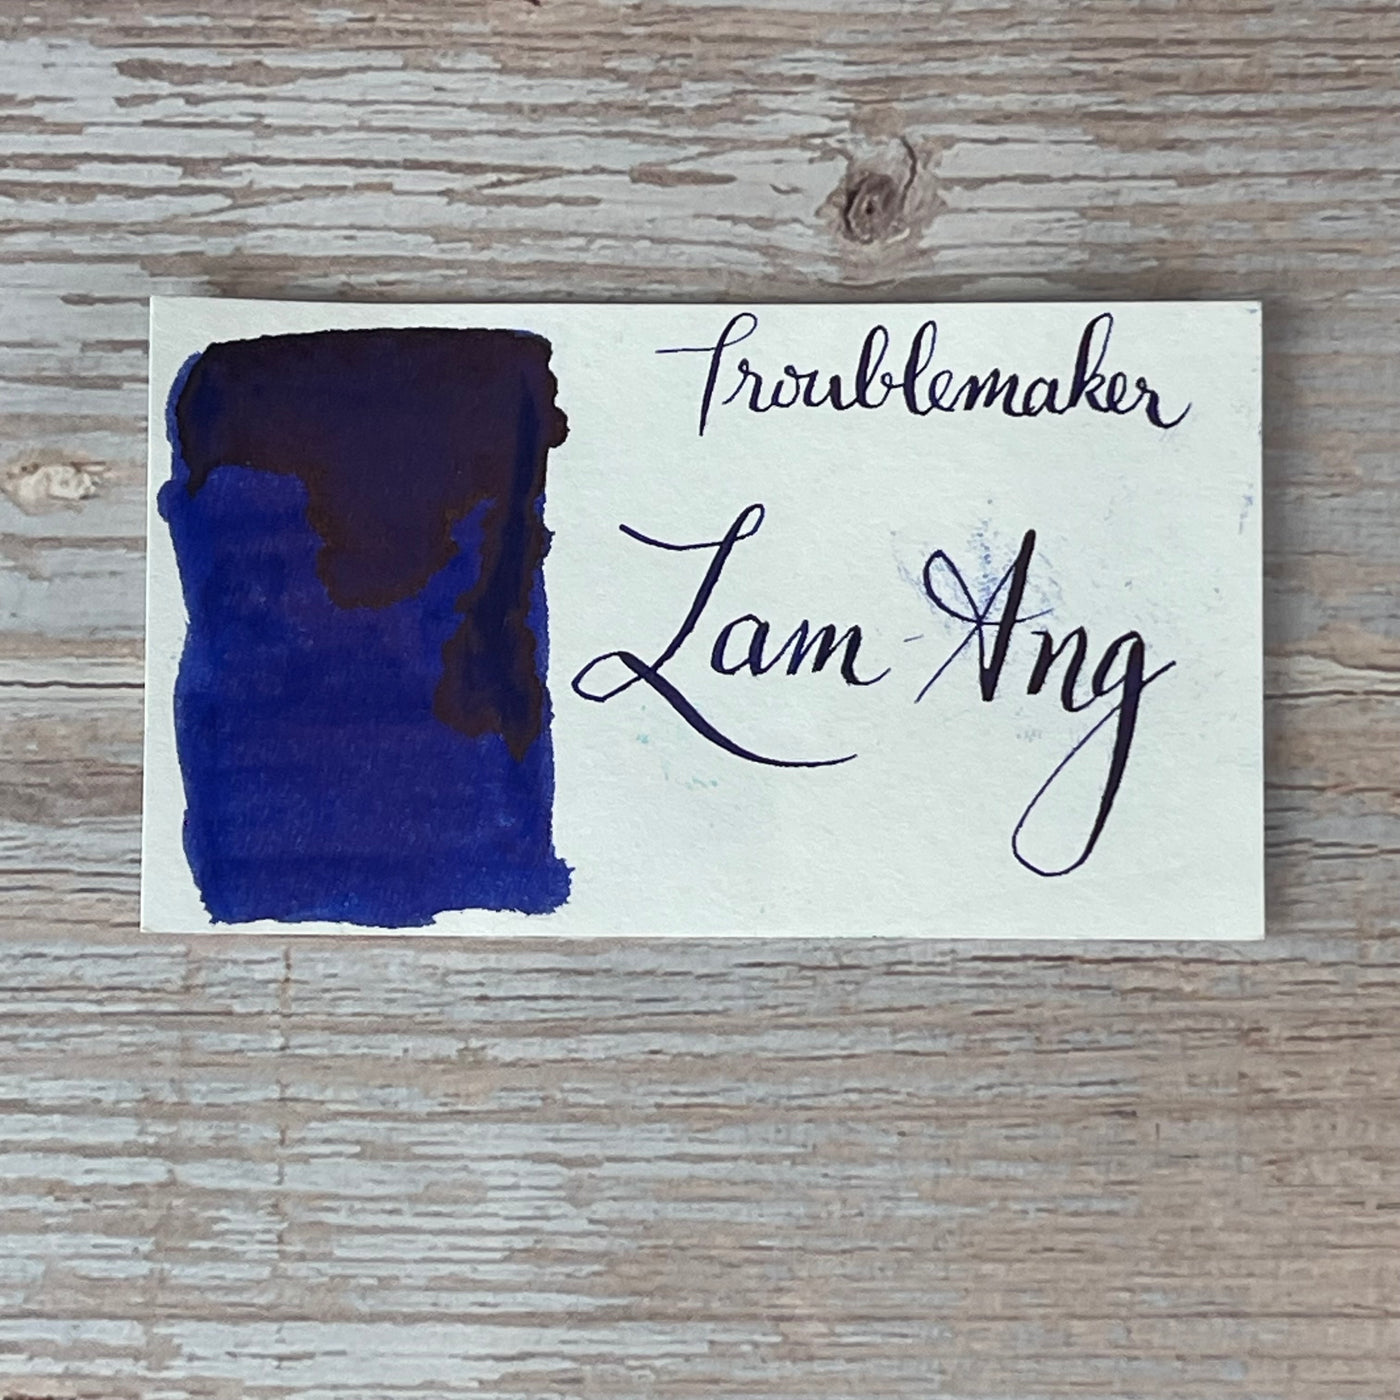 Troublemaker Lam-ang - 60ml Bottled Ink